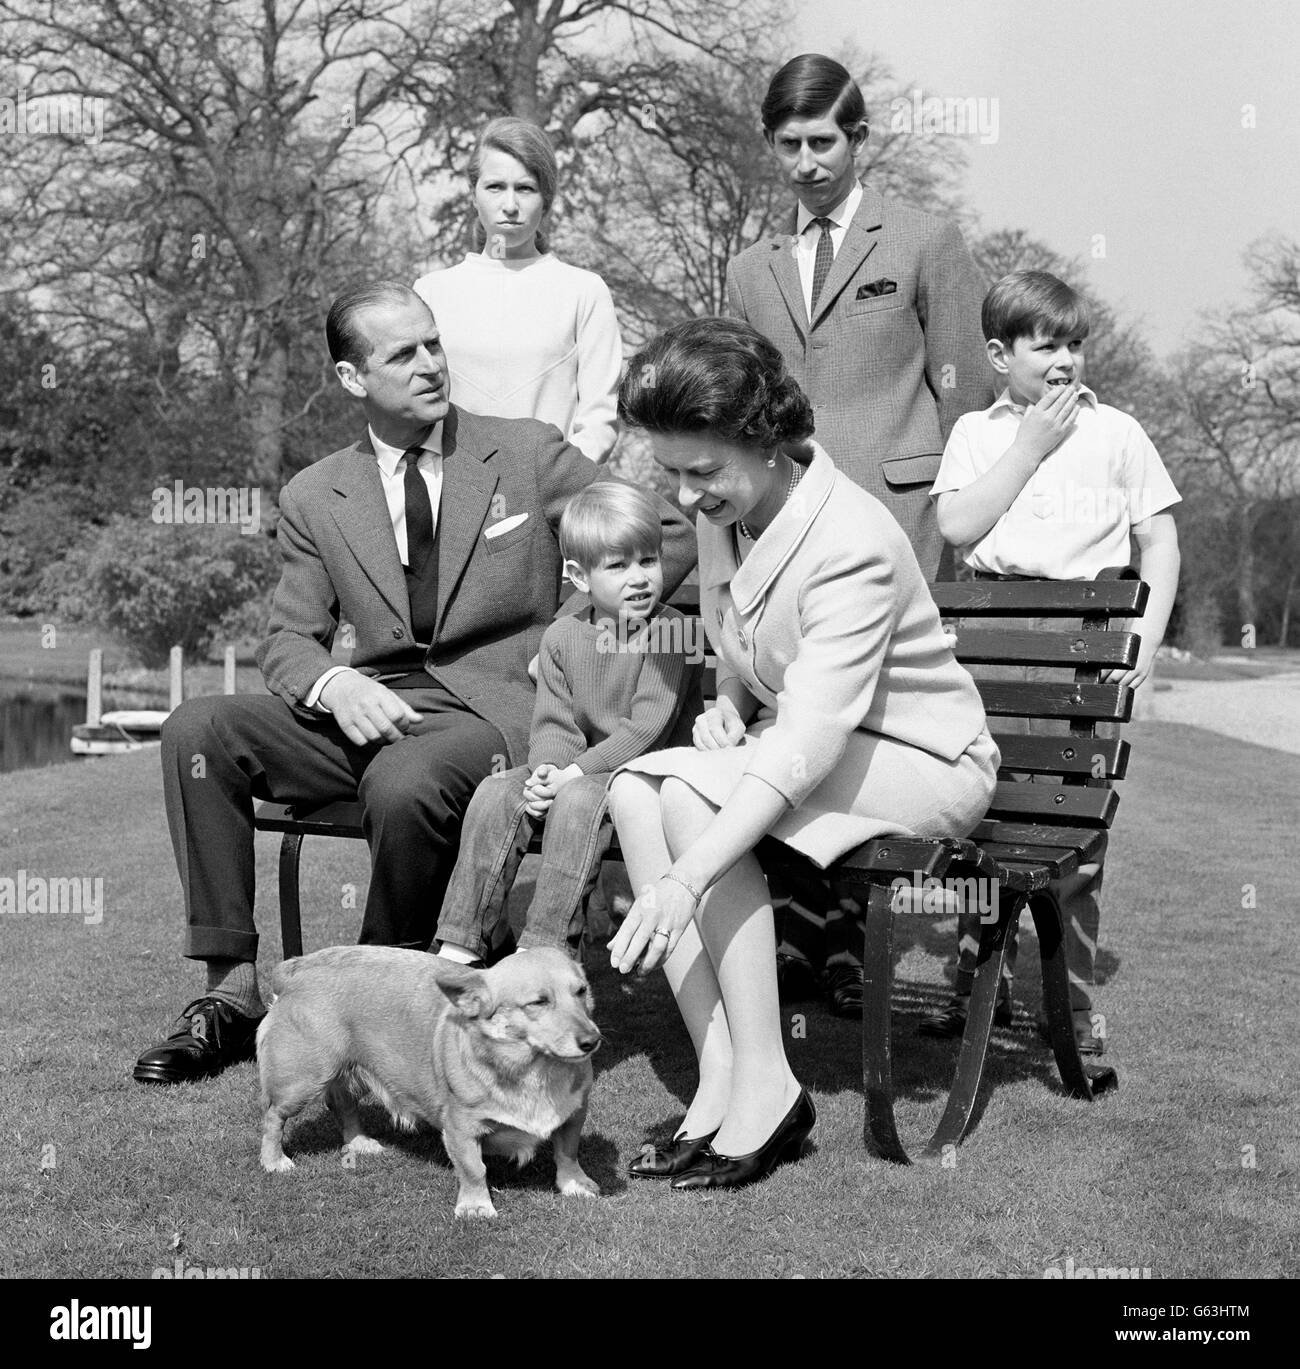 This time it is four-year-old Prince Edward and the pet Corgi who seem to be attracting the attention of Queen Elizabeth II, 42. The Royal Family were posing in the gardens at Frogmore, Windsor, for special birthday photographs. Something else seems to be attracting the attention of the Duke of Edinburgh and Prince Andrew. Also in the picture are Princess Anne (18 in August) and the Prince of Wales, 19. Stock Photo